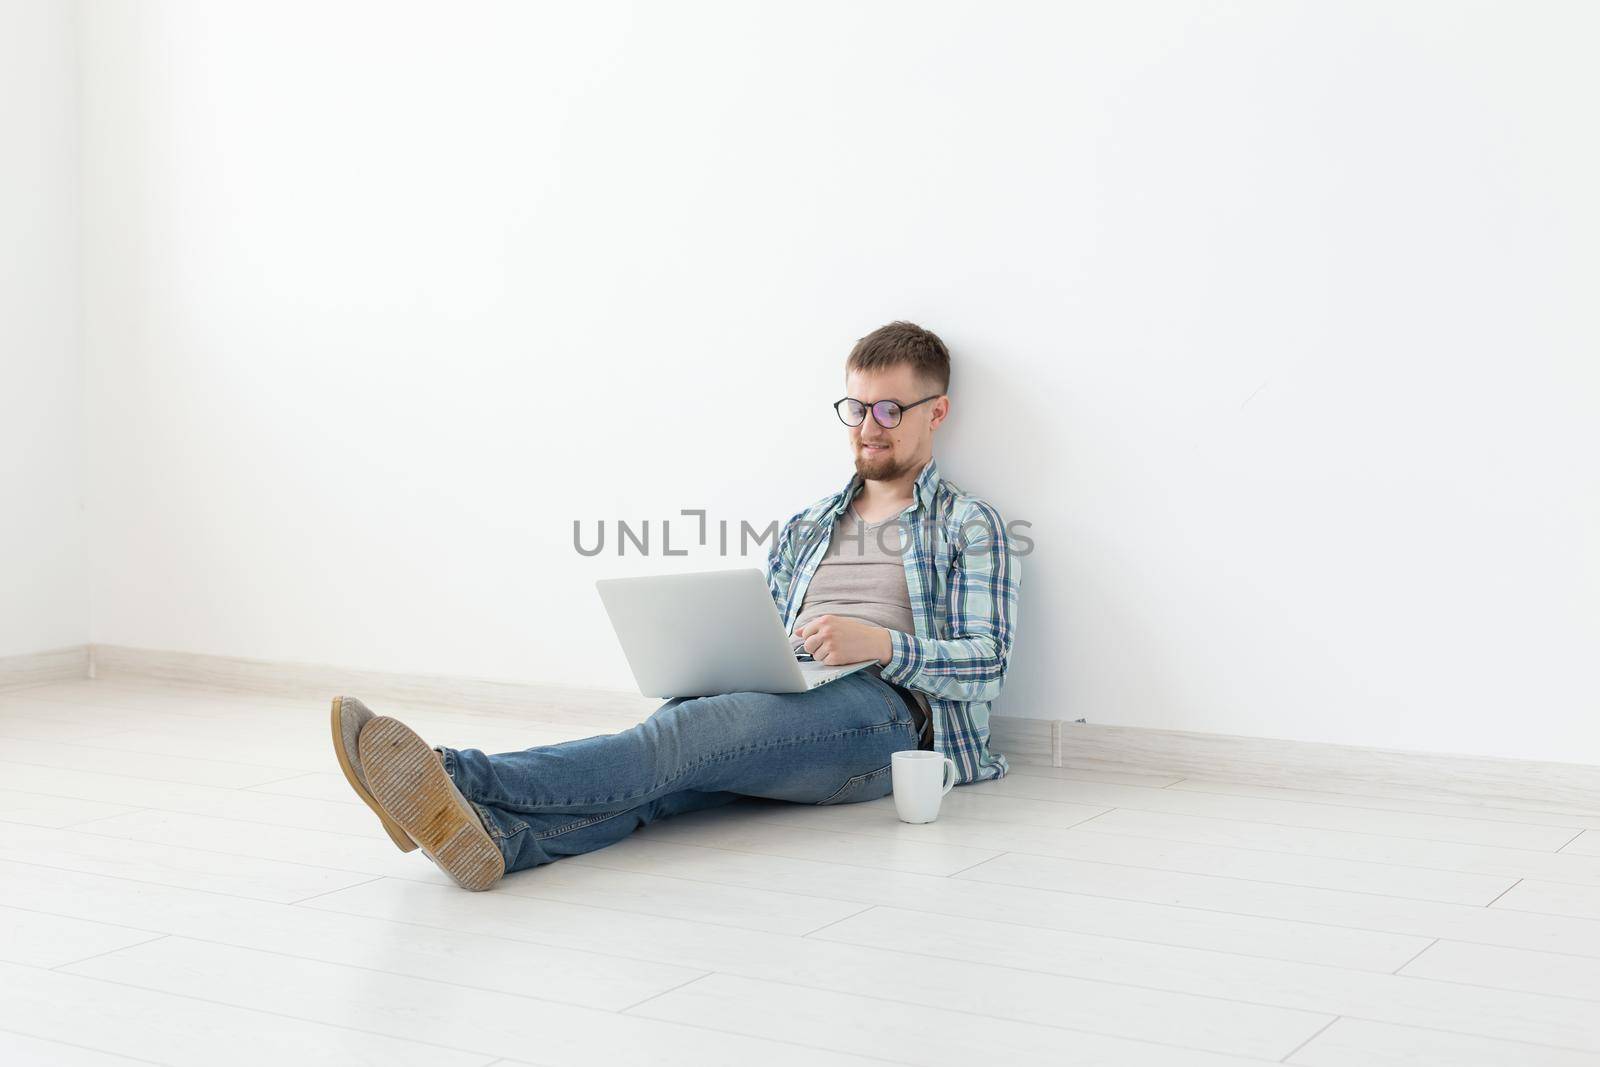 Positive young man in casual clothes surfing the Internet in search of new housing sitting on the floor in an empty room. The concept of finding an apartment using the Internet and a laptop. Copyspace